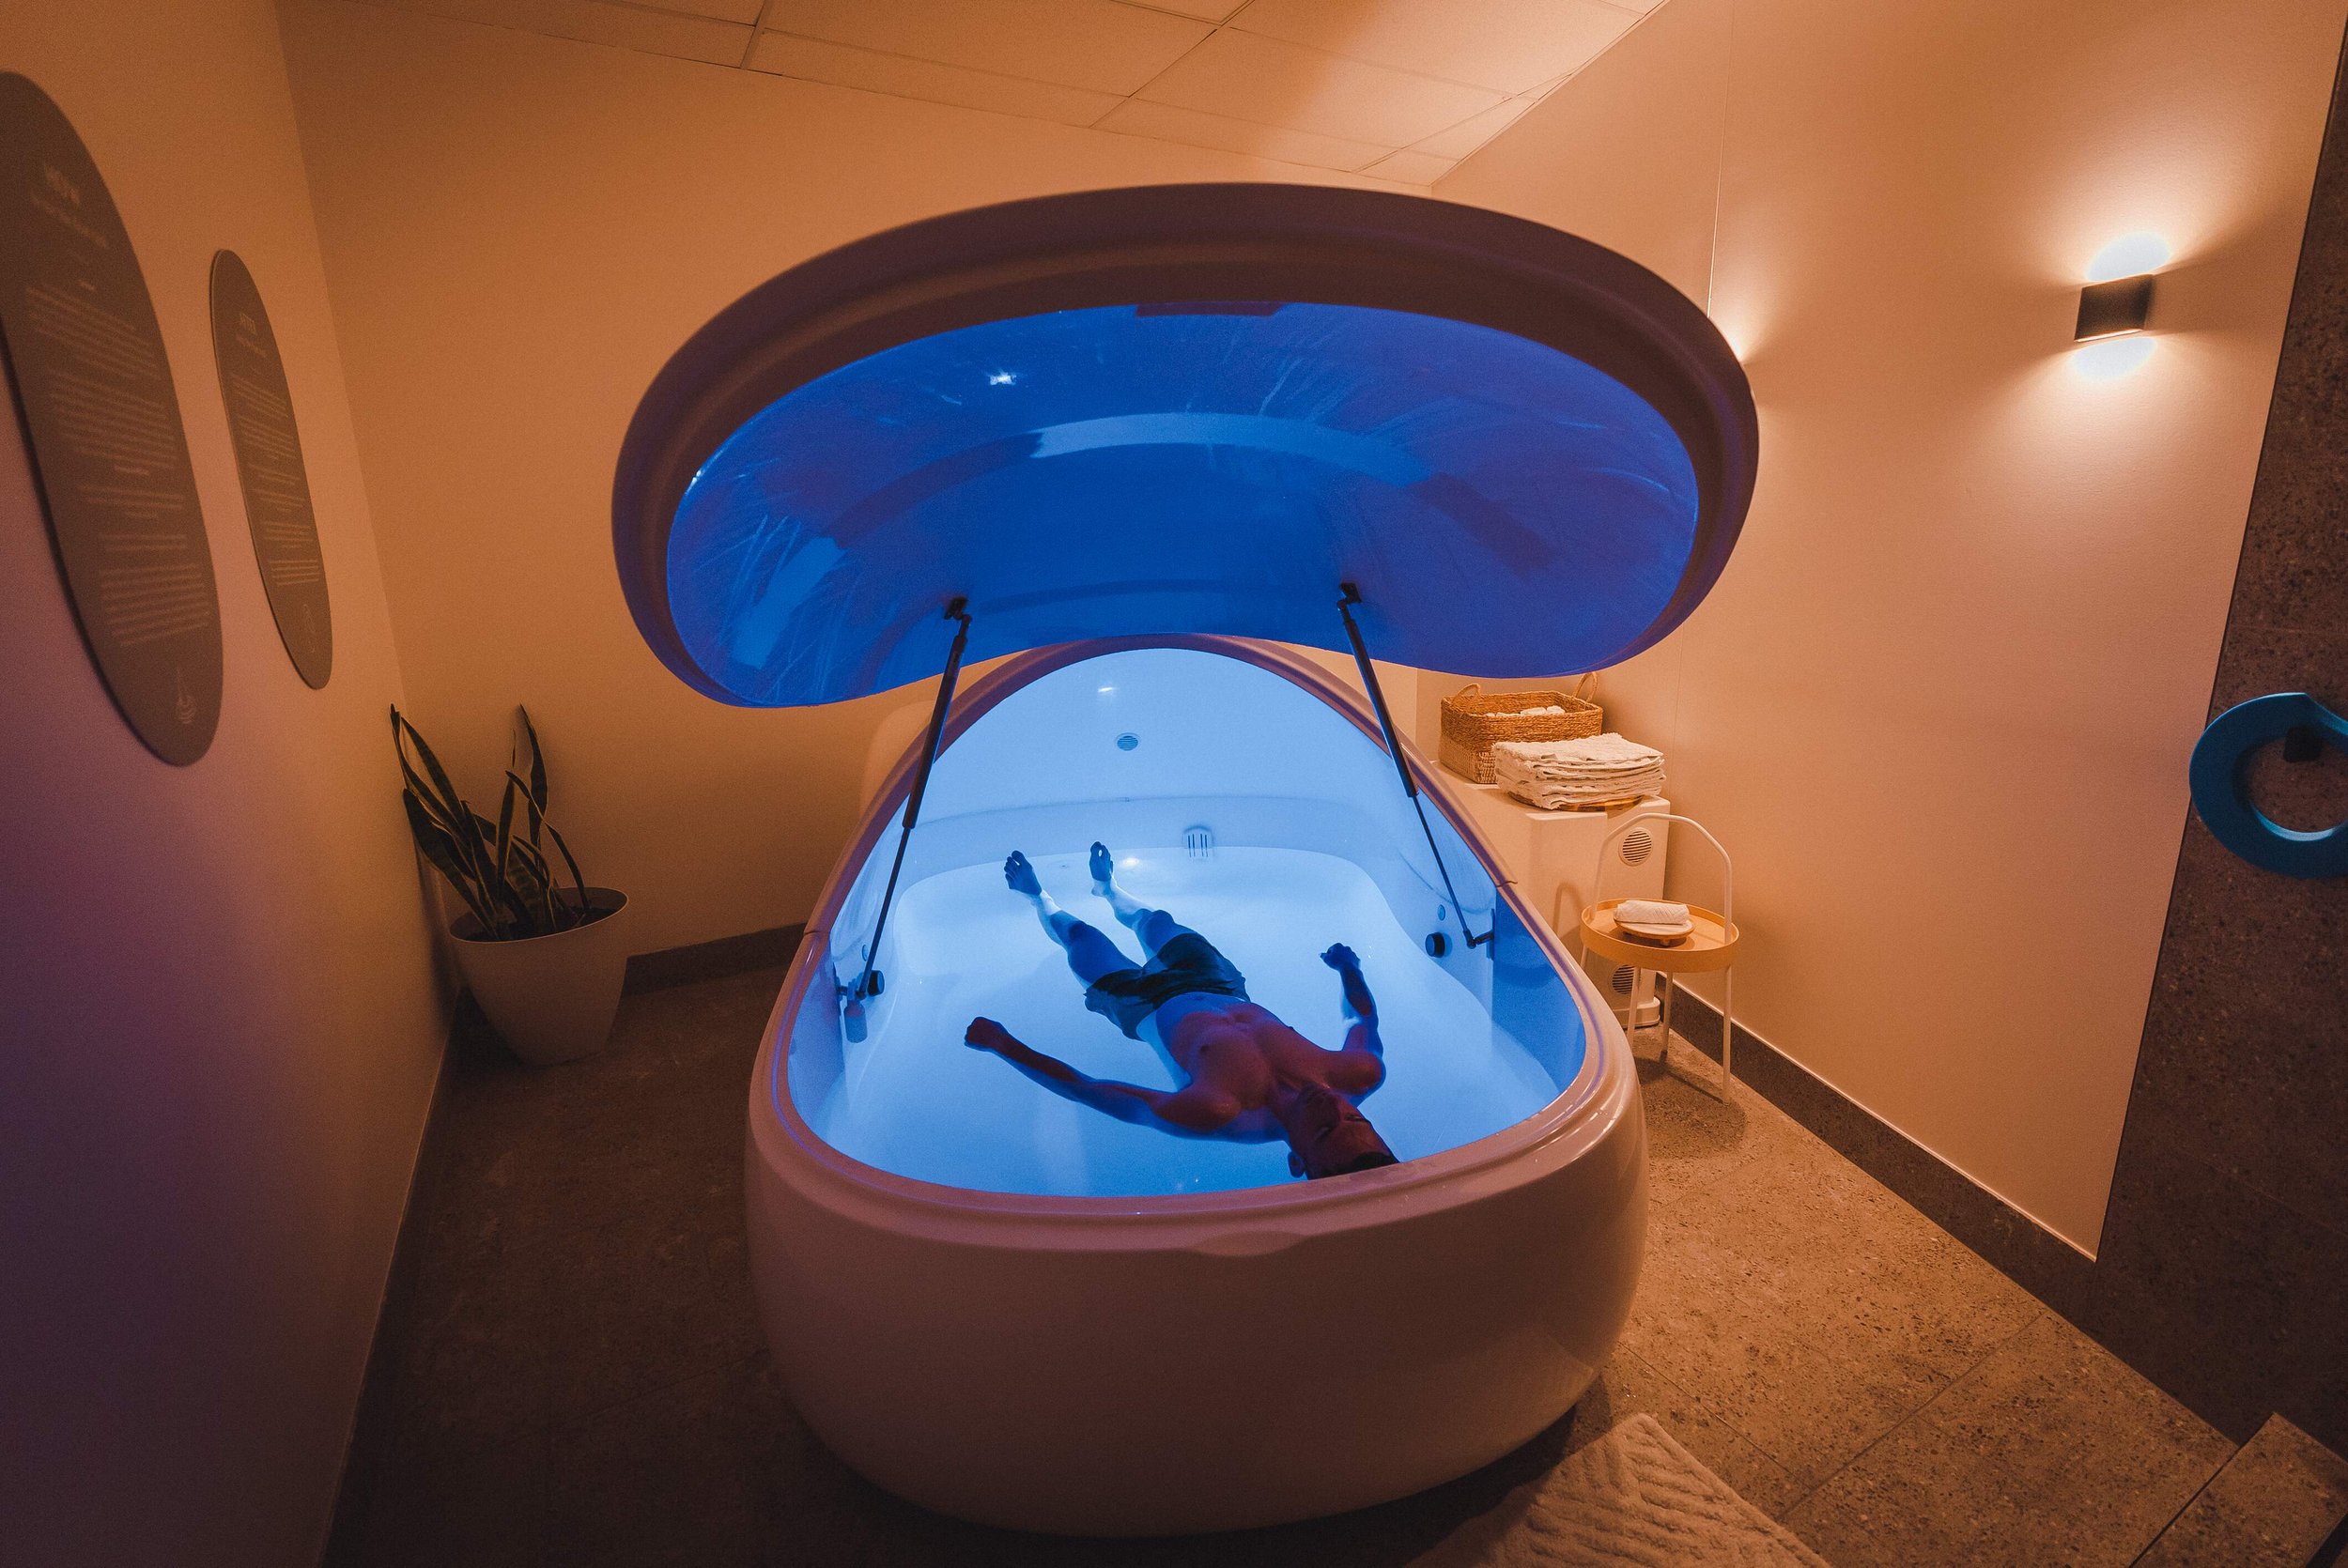 How Sanitary Are Float Pods?